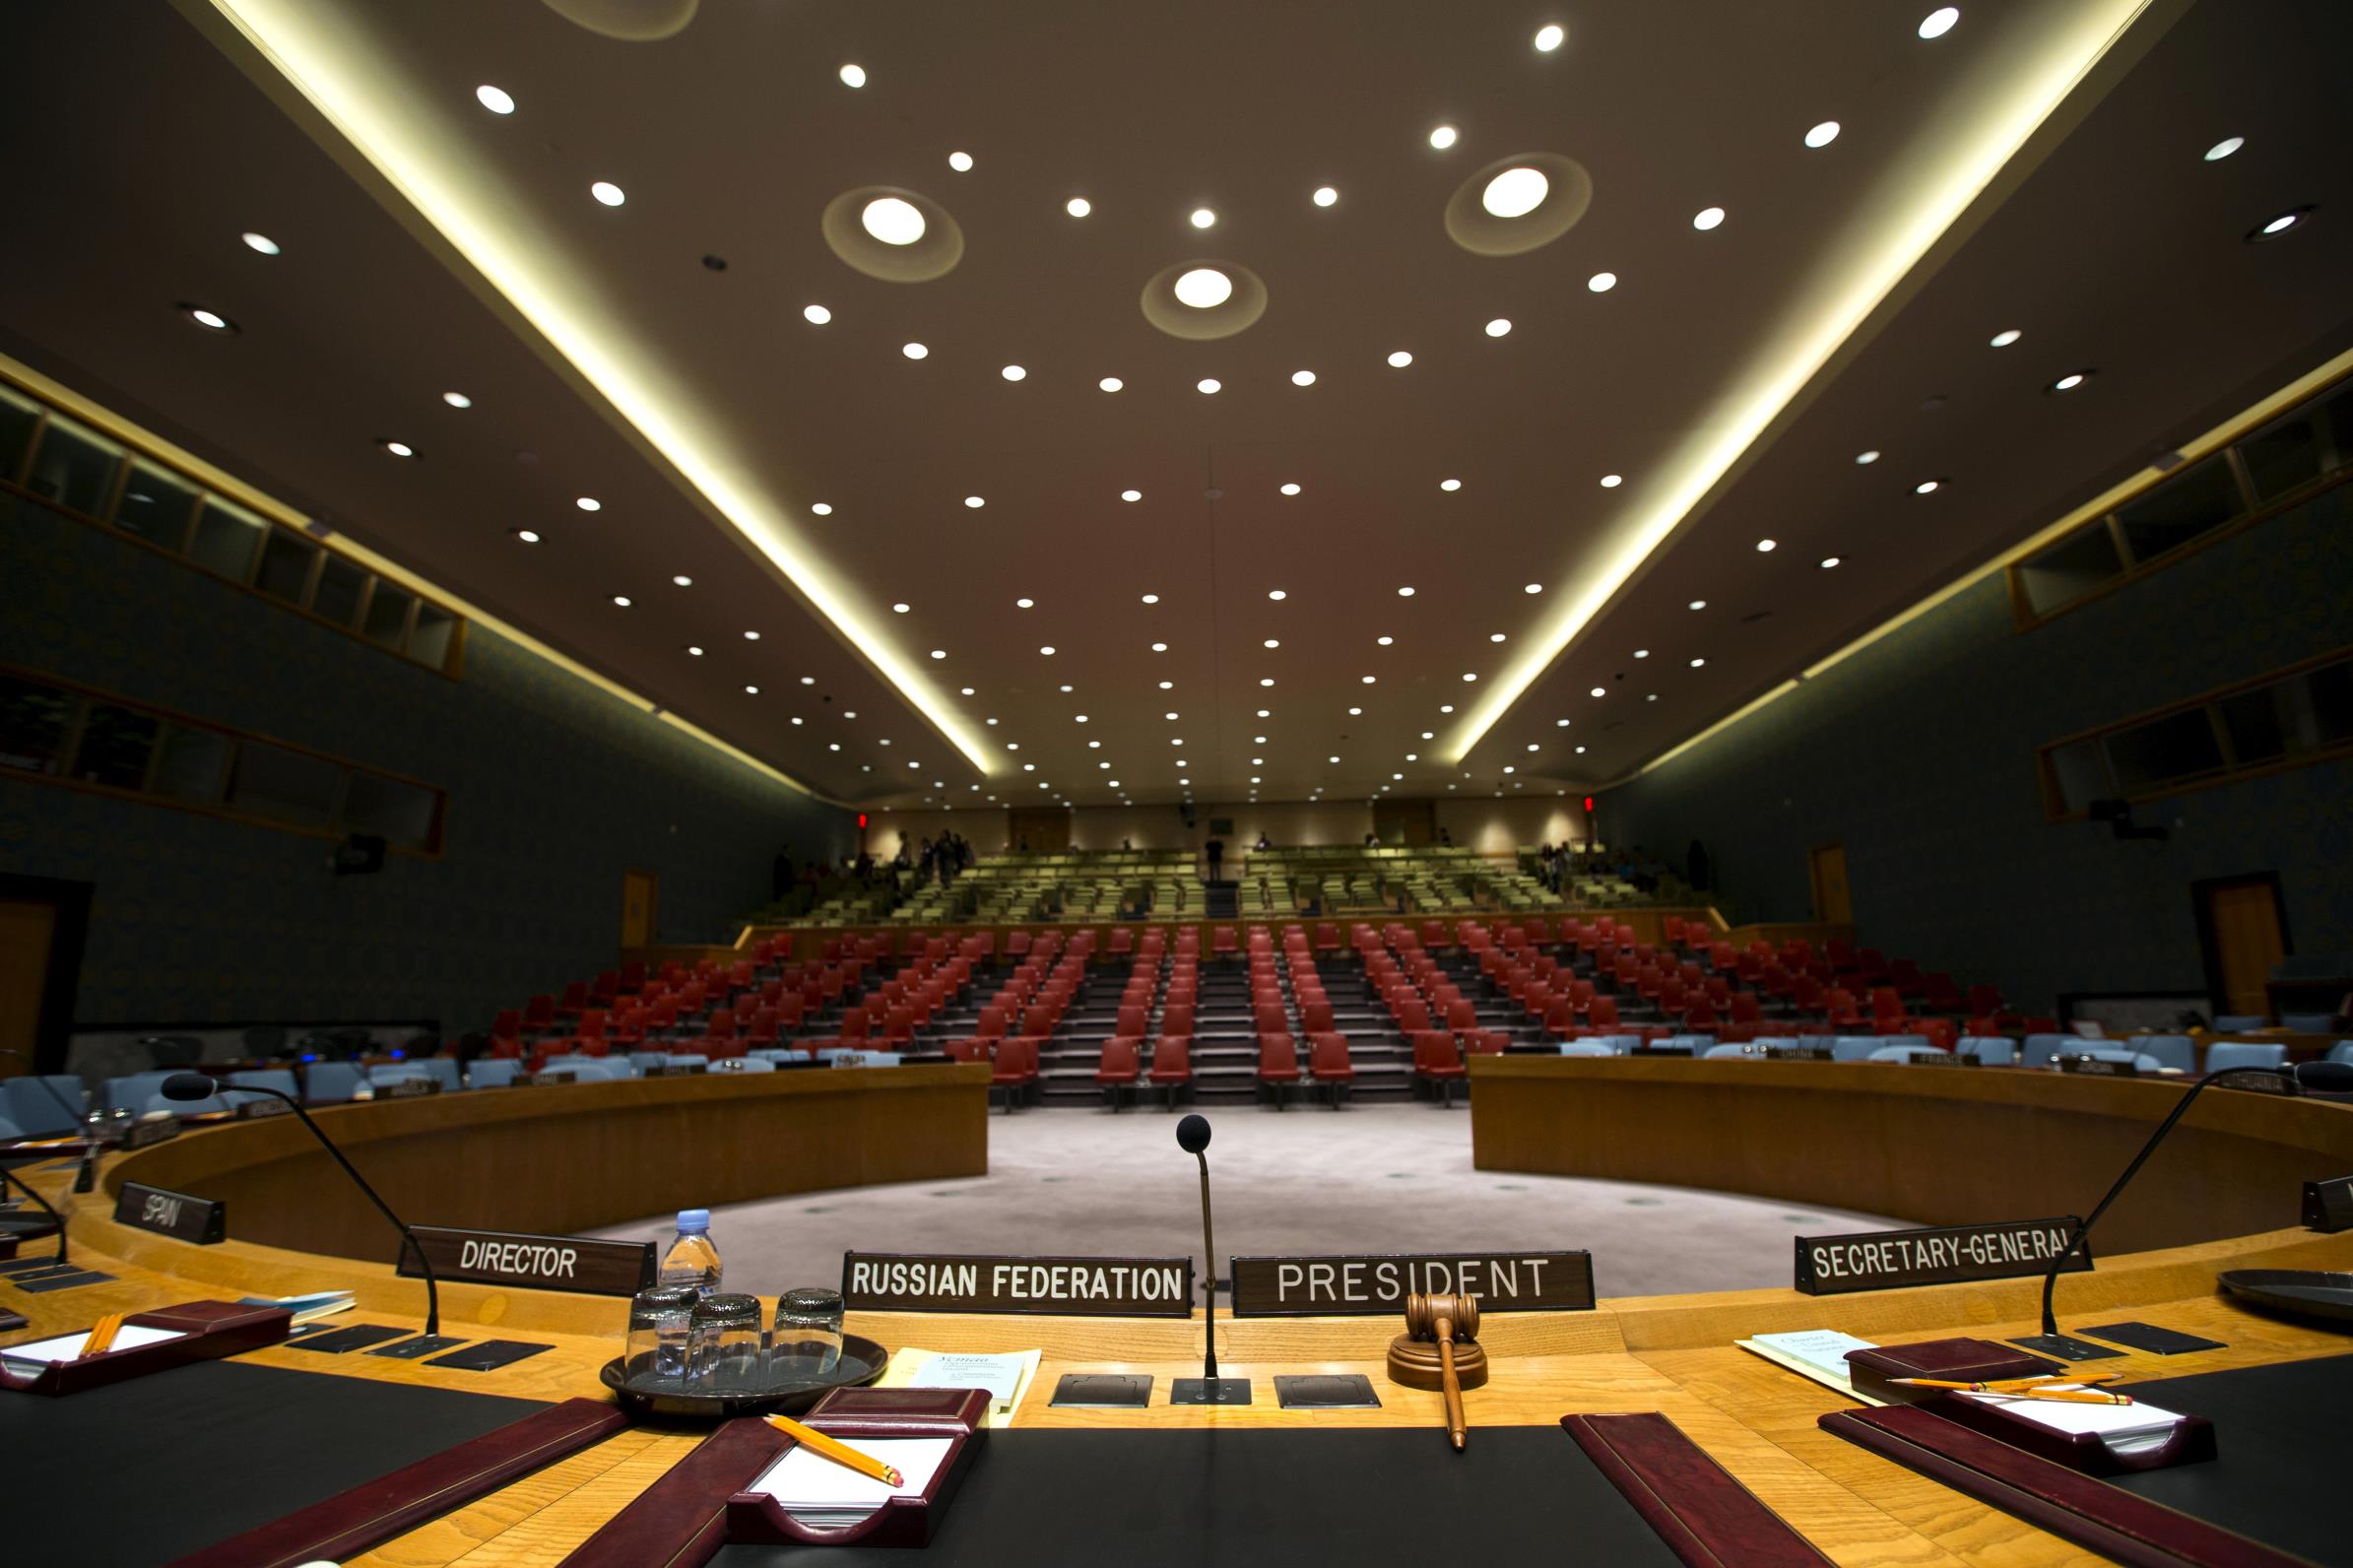 The Security Council chamber is seen from behind the council president's chair at the United Nations headquarters in New York City, September 18, 2015 REUTERS/Mike Segar/File Photo